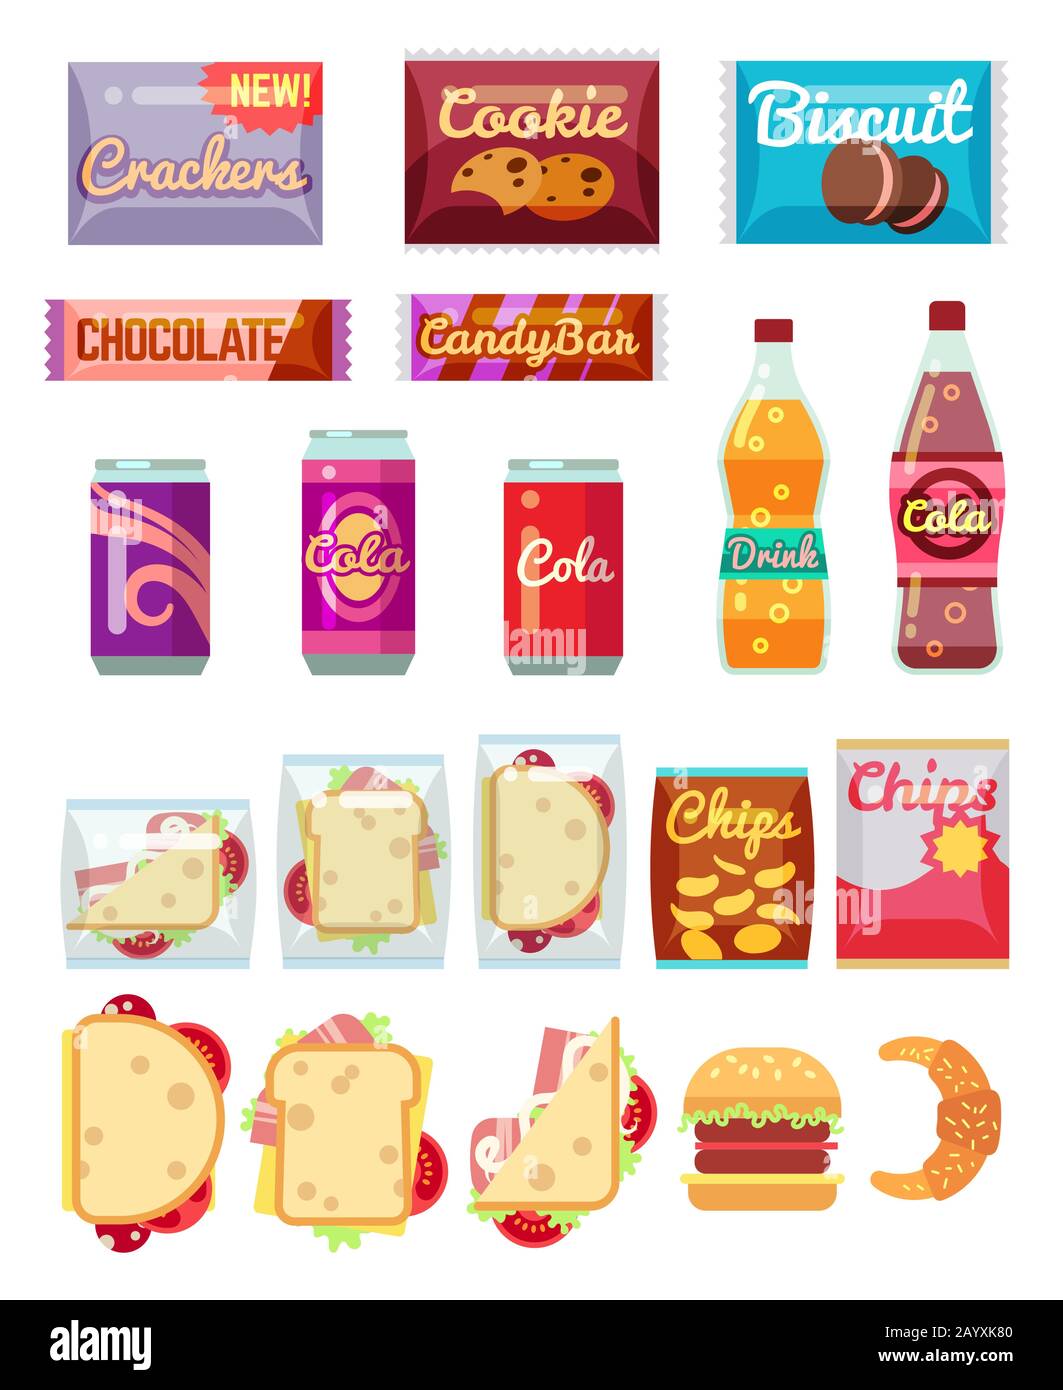 Vending machine products packaging. Fast food, snacks and drinks vector icons in flat style Stock Vector